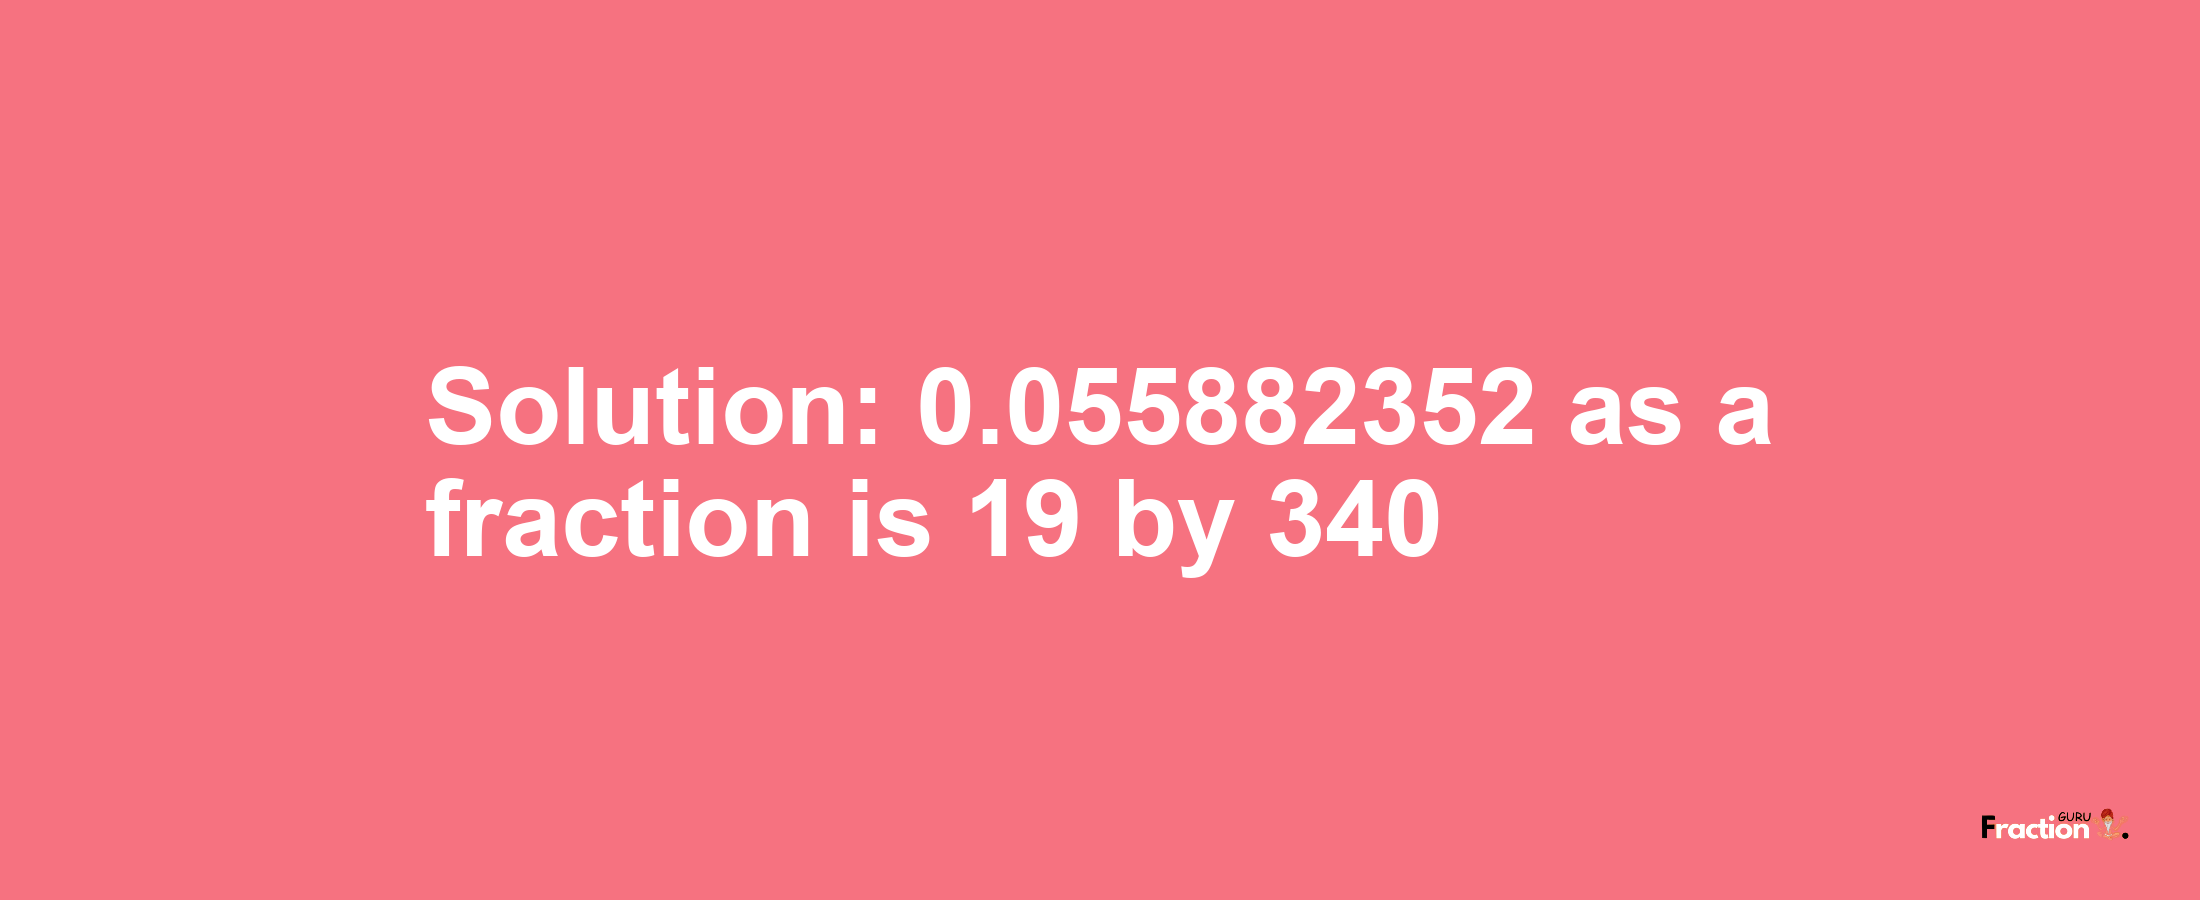 Solution:0.055882352 as a fraction is 19/340